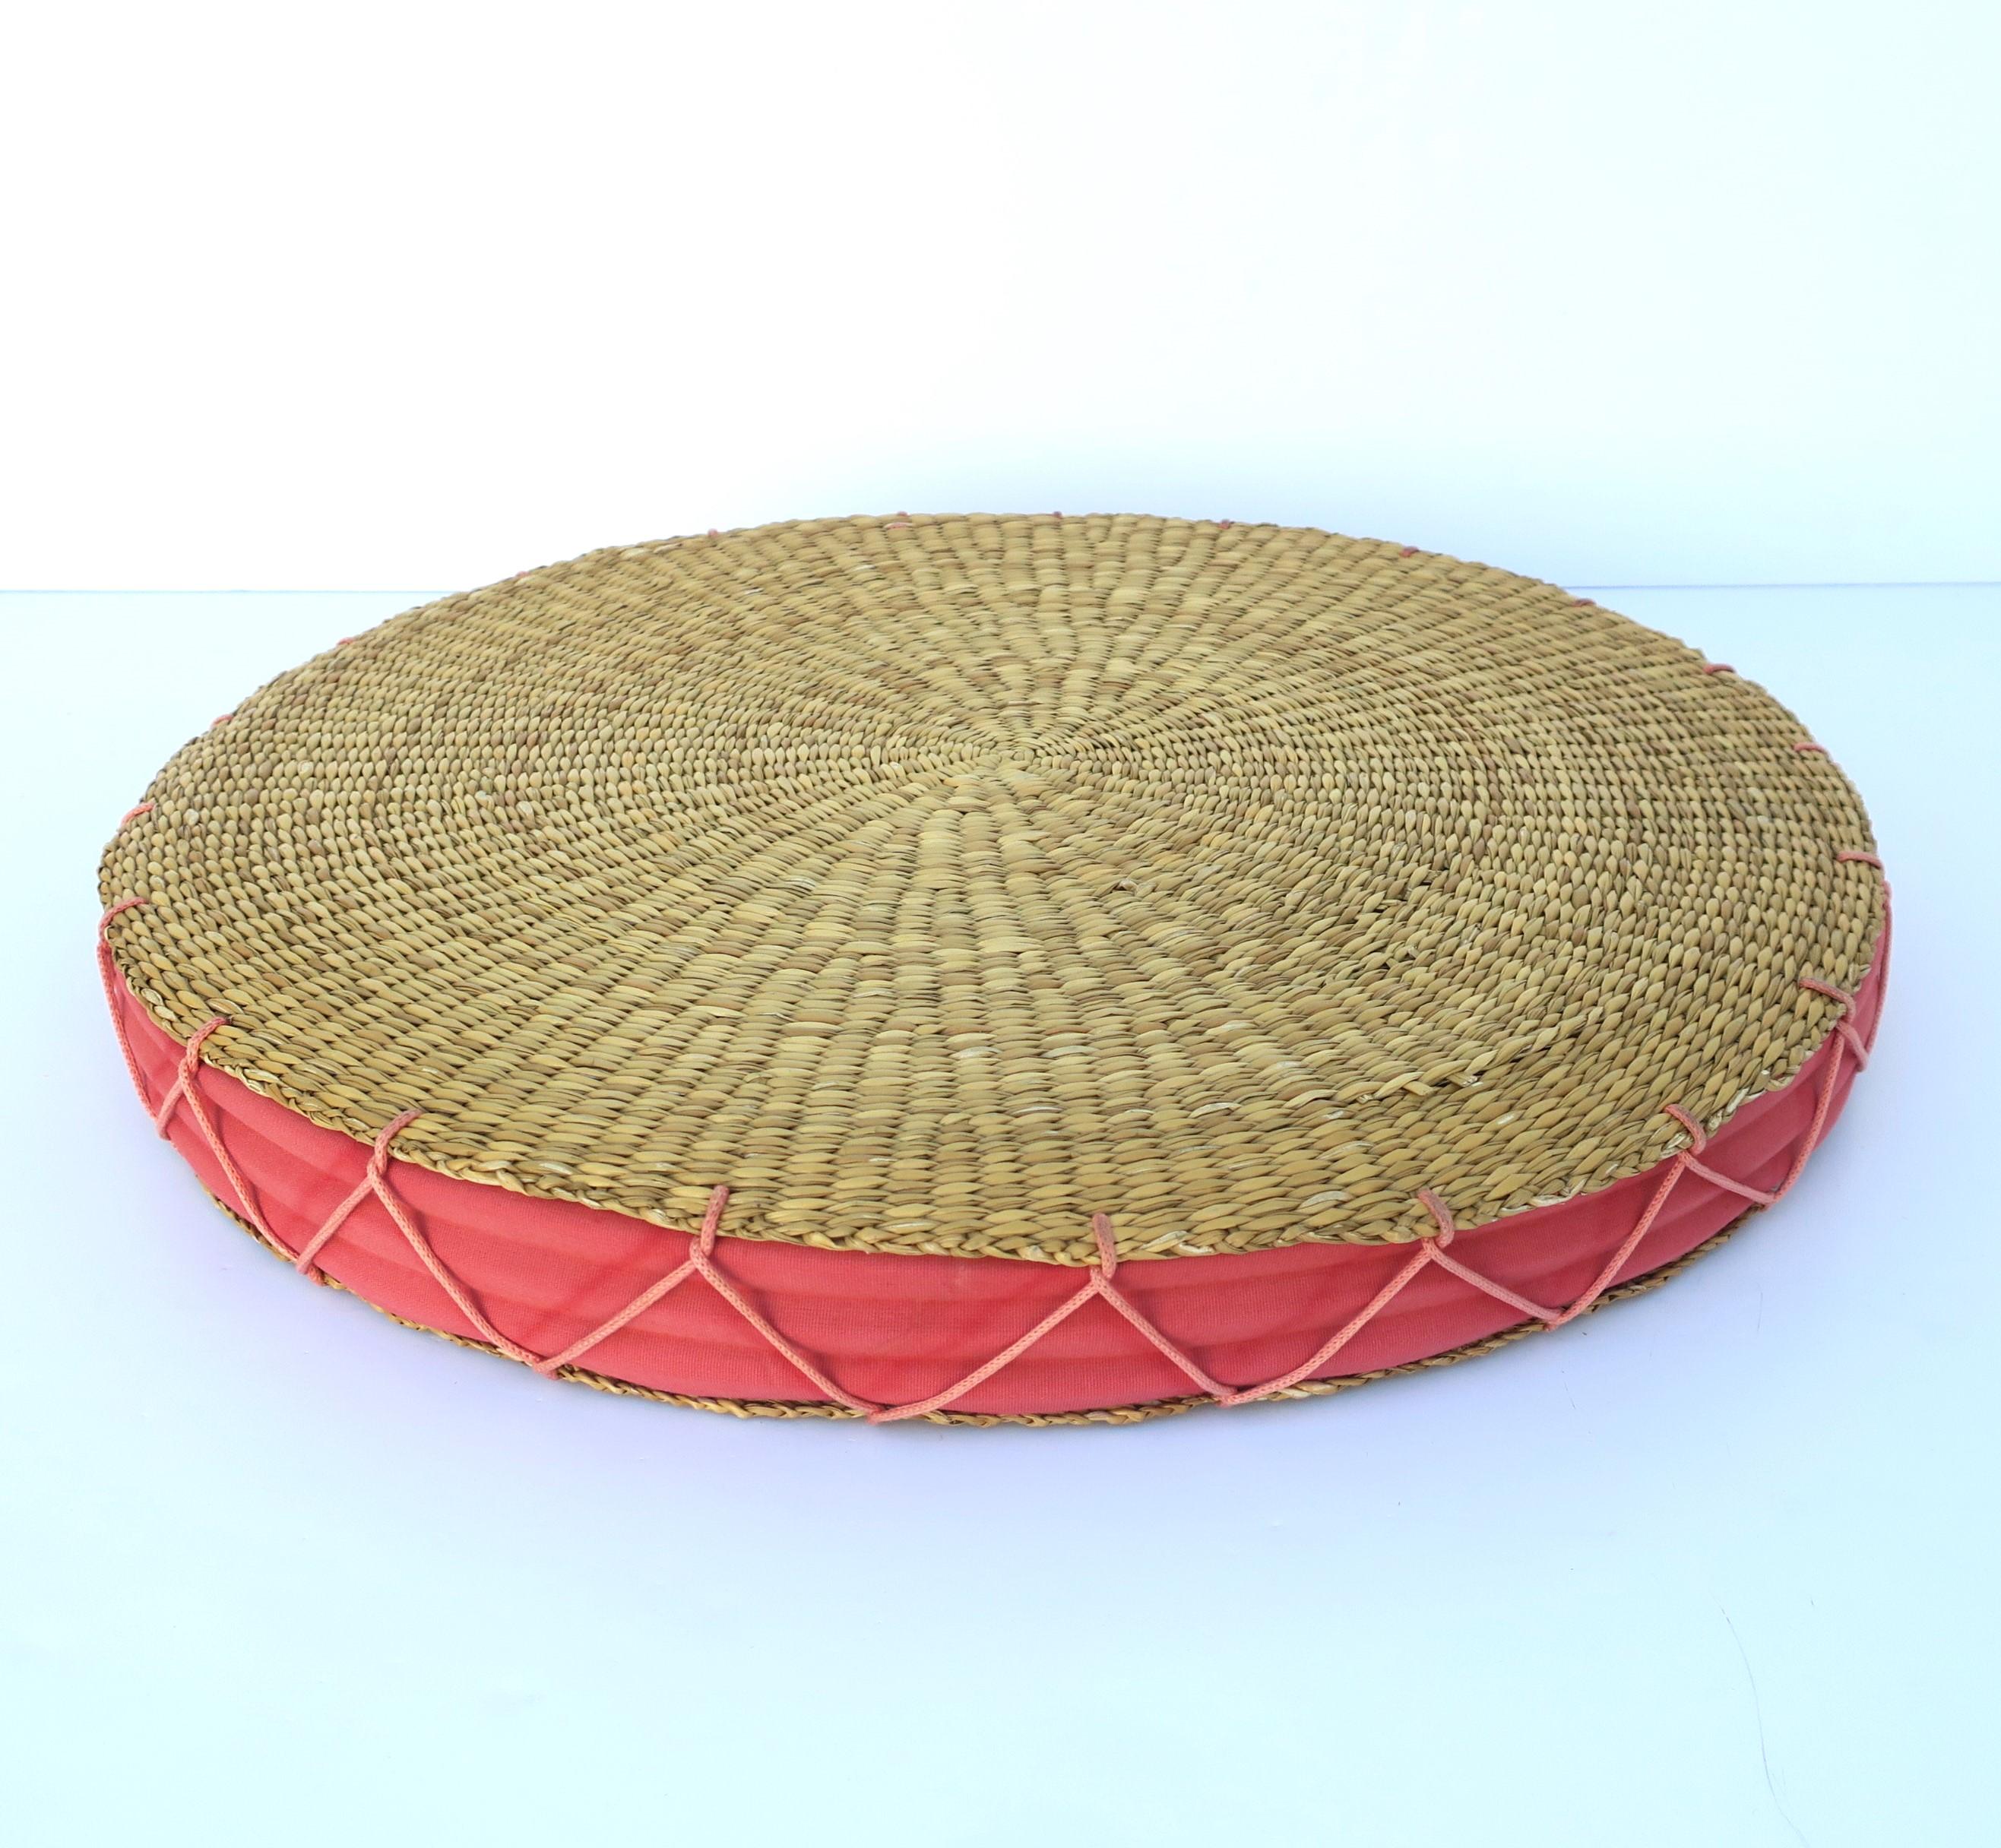 Bohemian Wicker Seat or Floor Cushion, Watermelon Pink and Tan For Sale